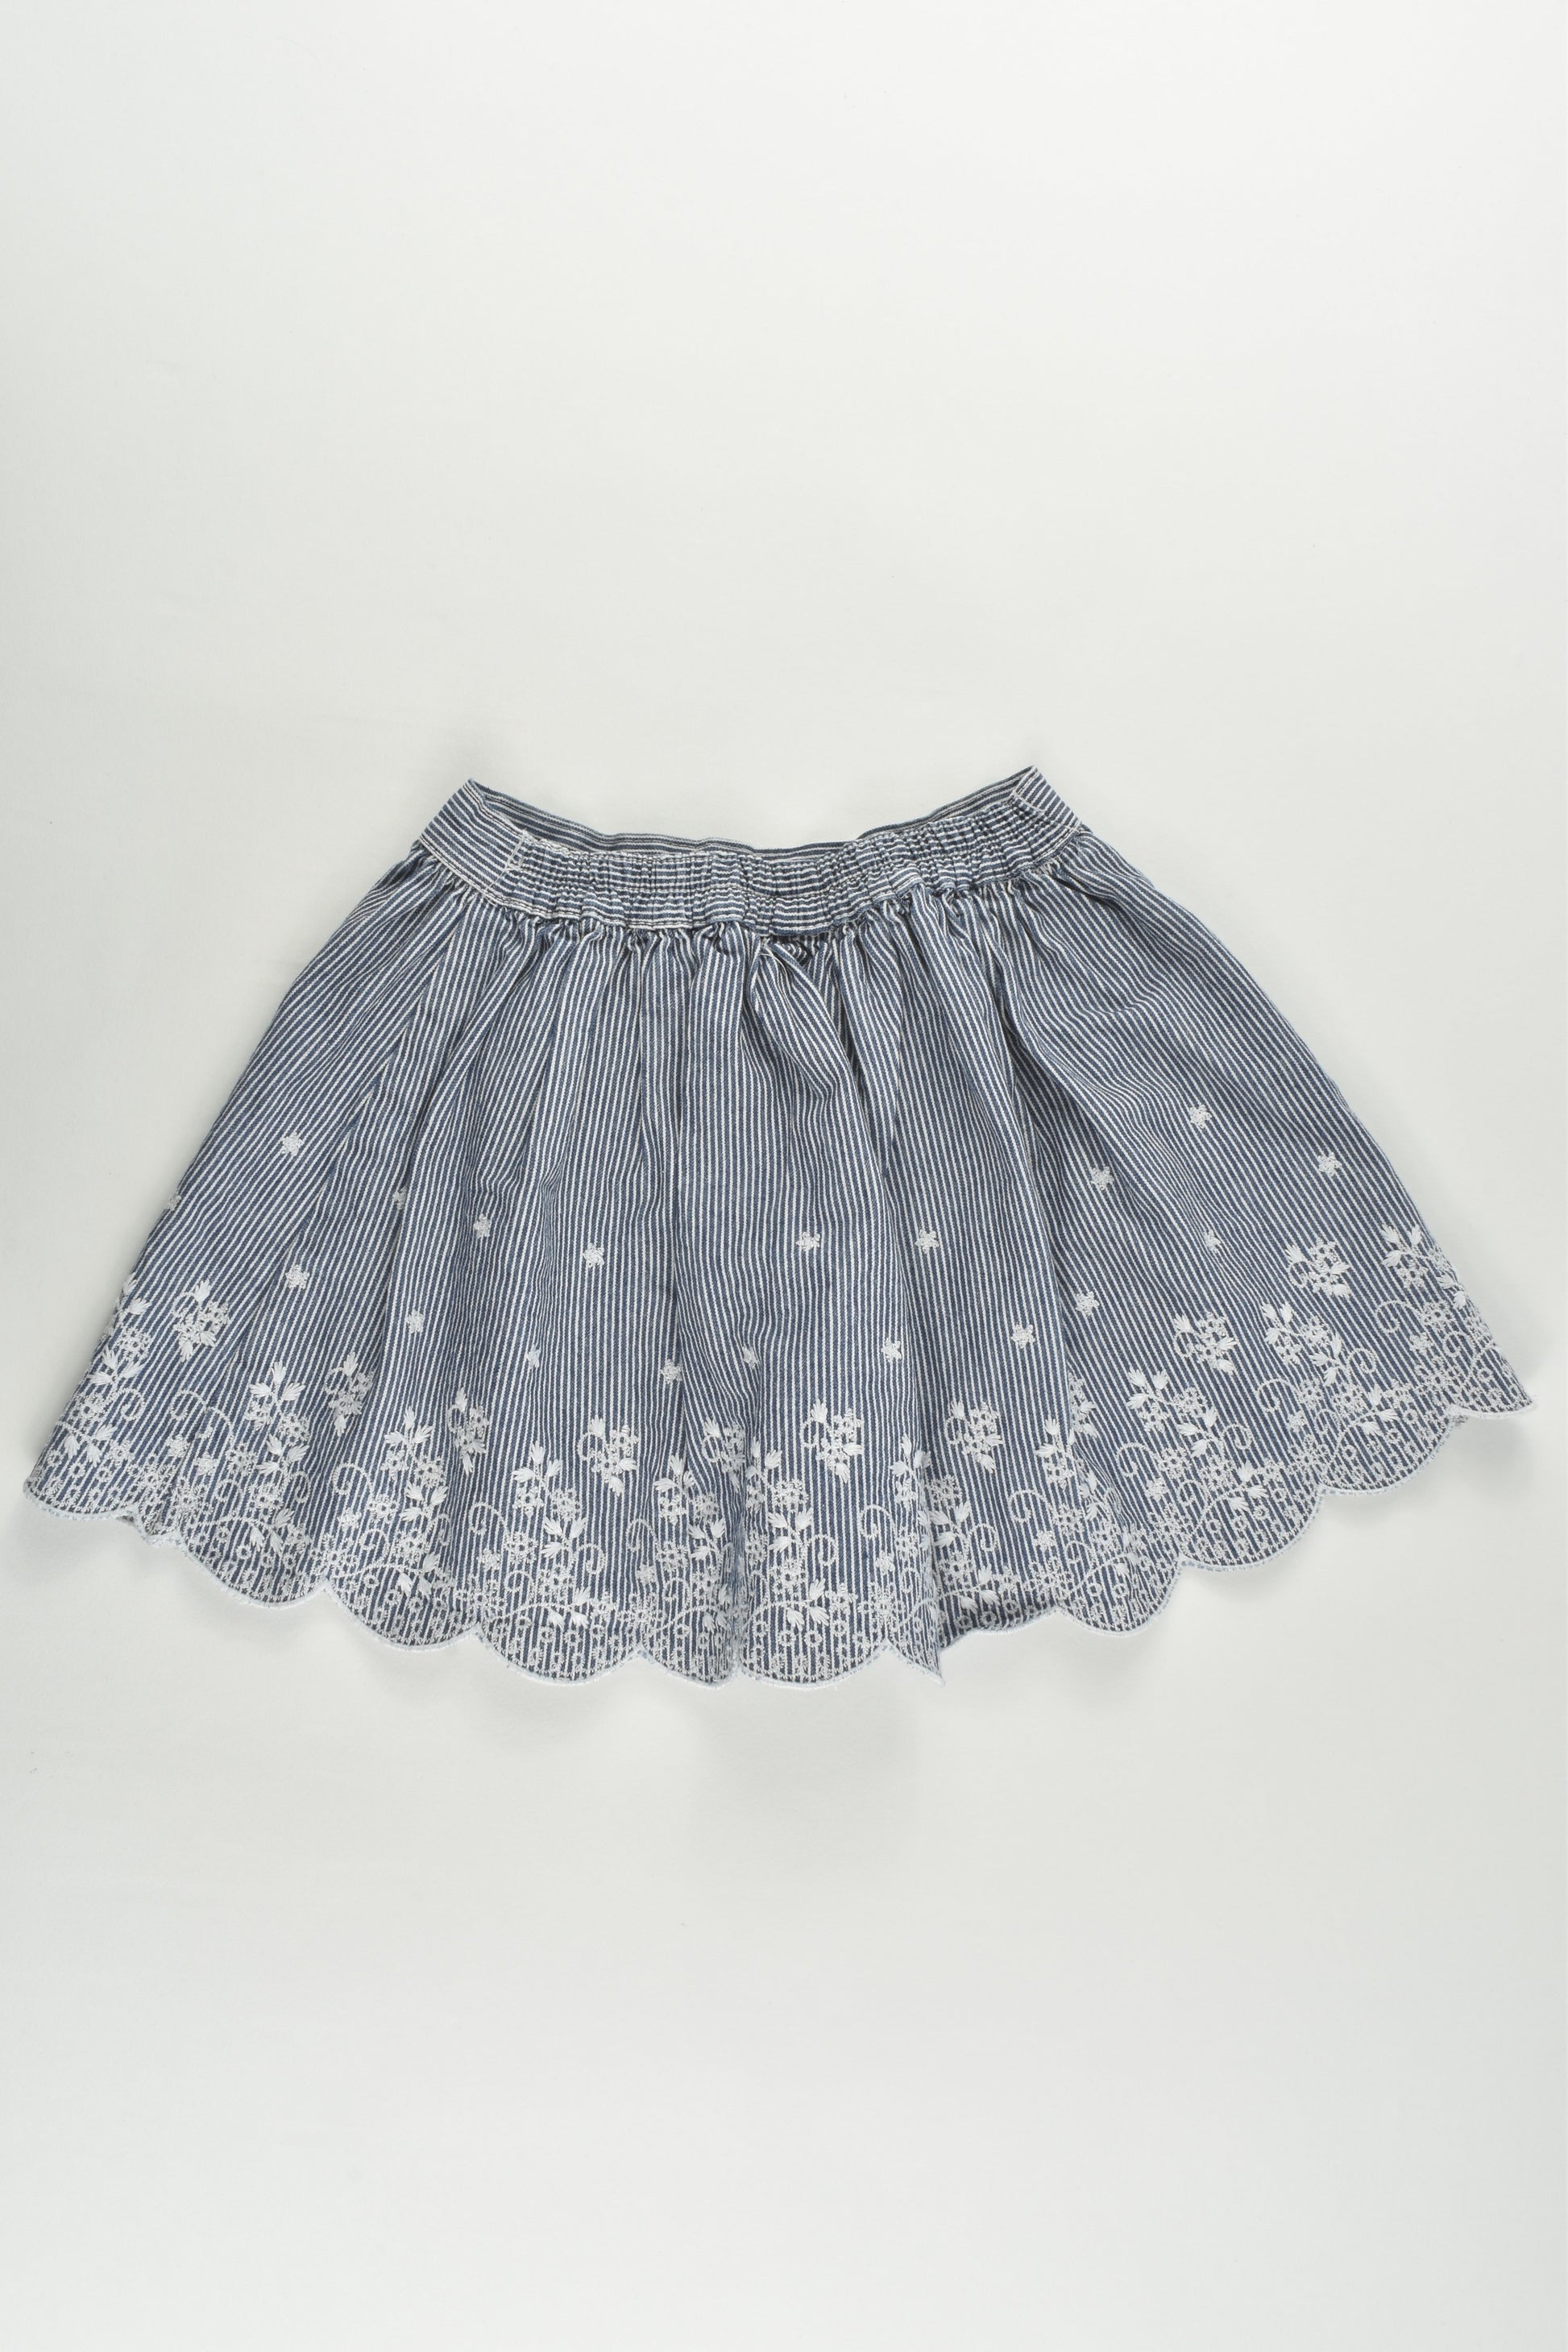 Mothercare Size 2 (92 cm) Striped Skirt with Lace Details